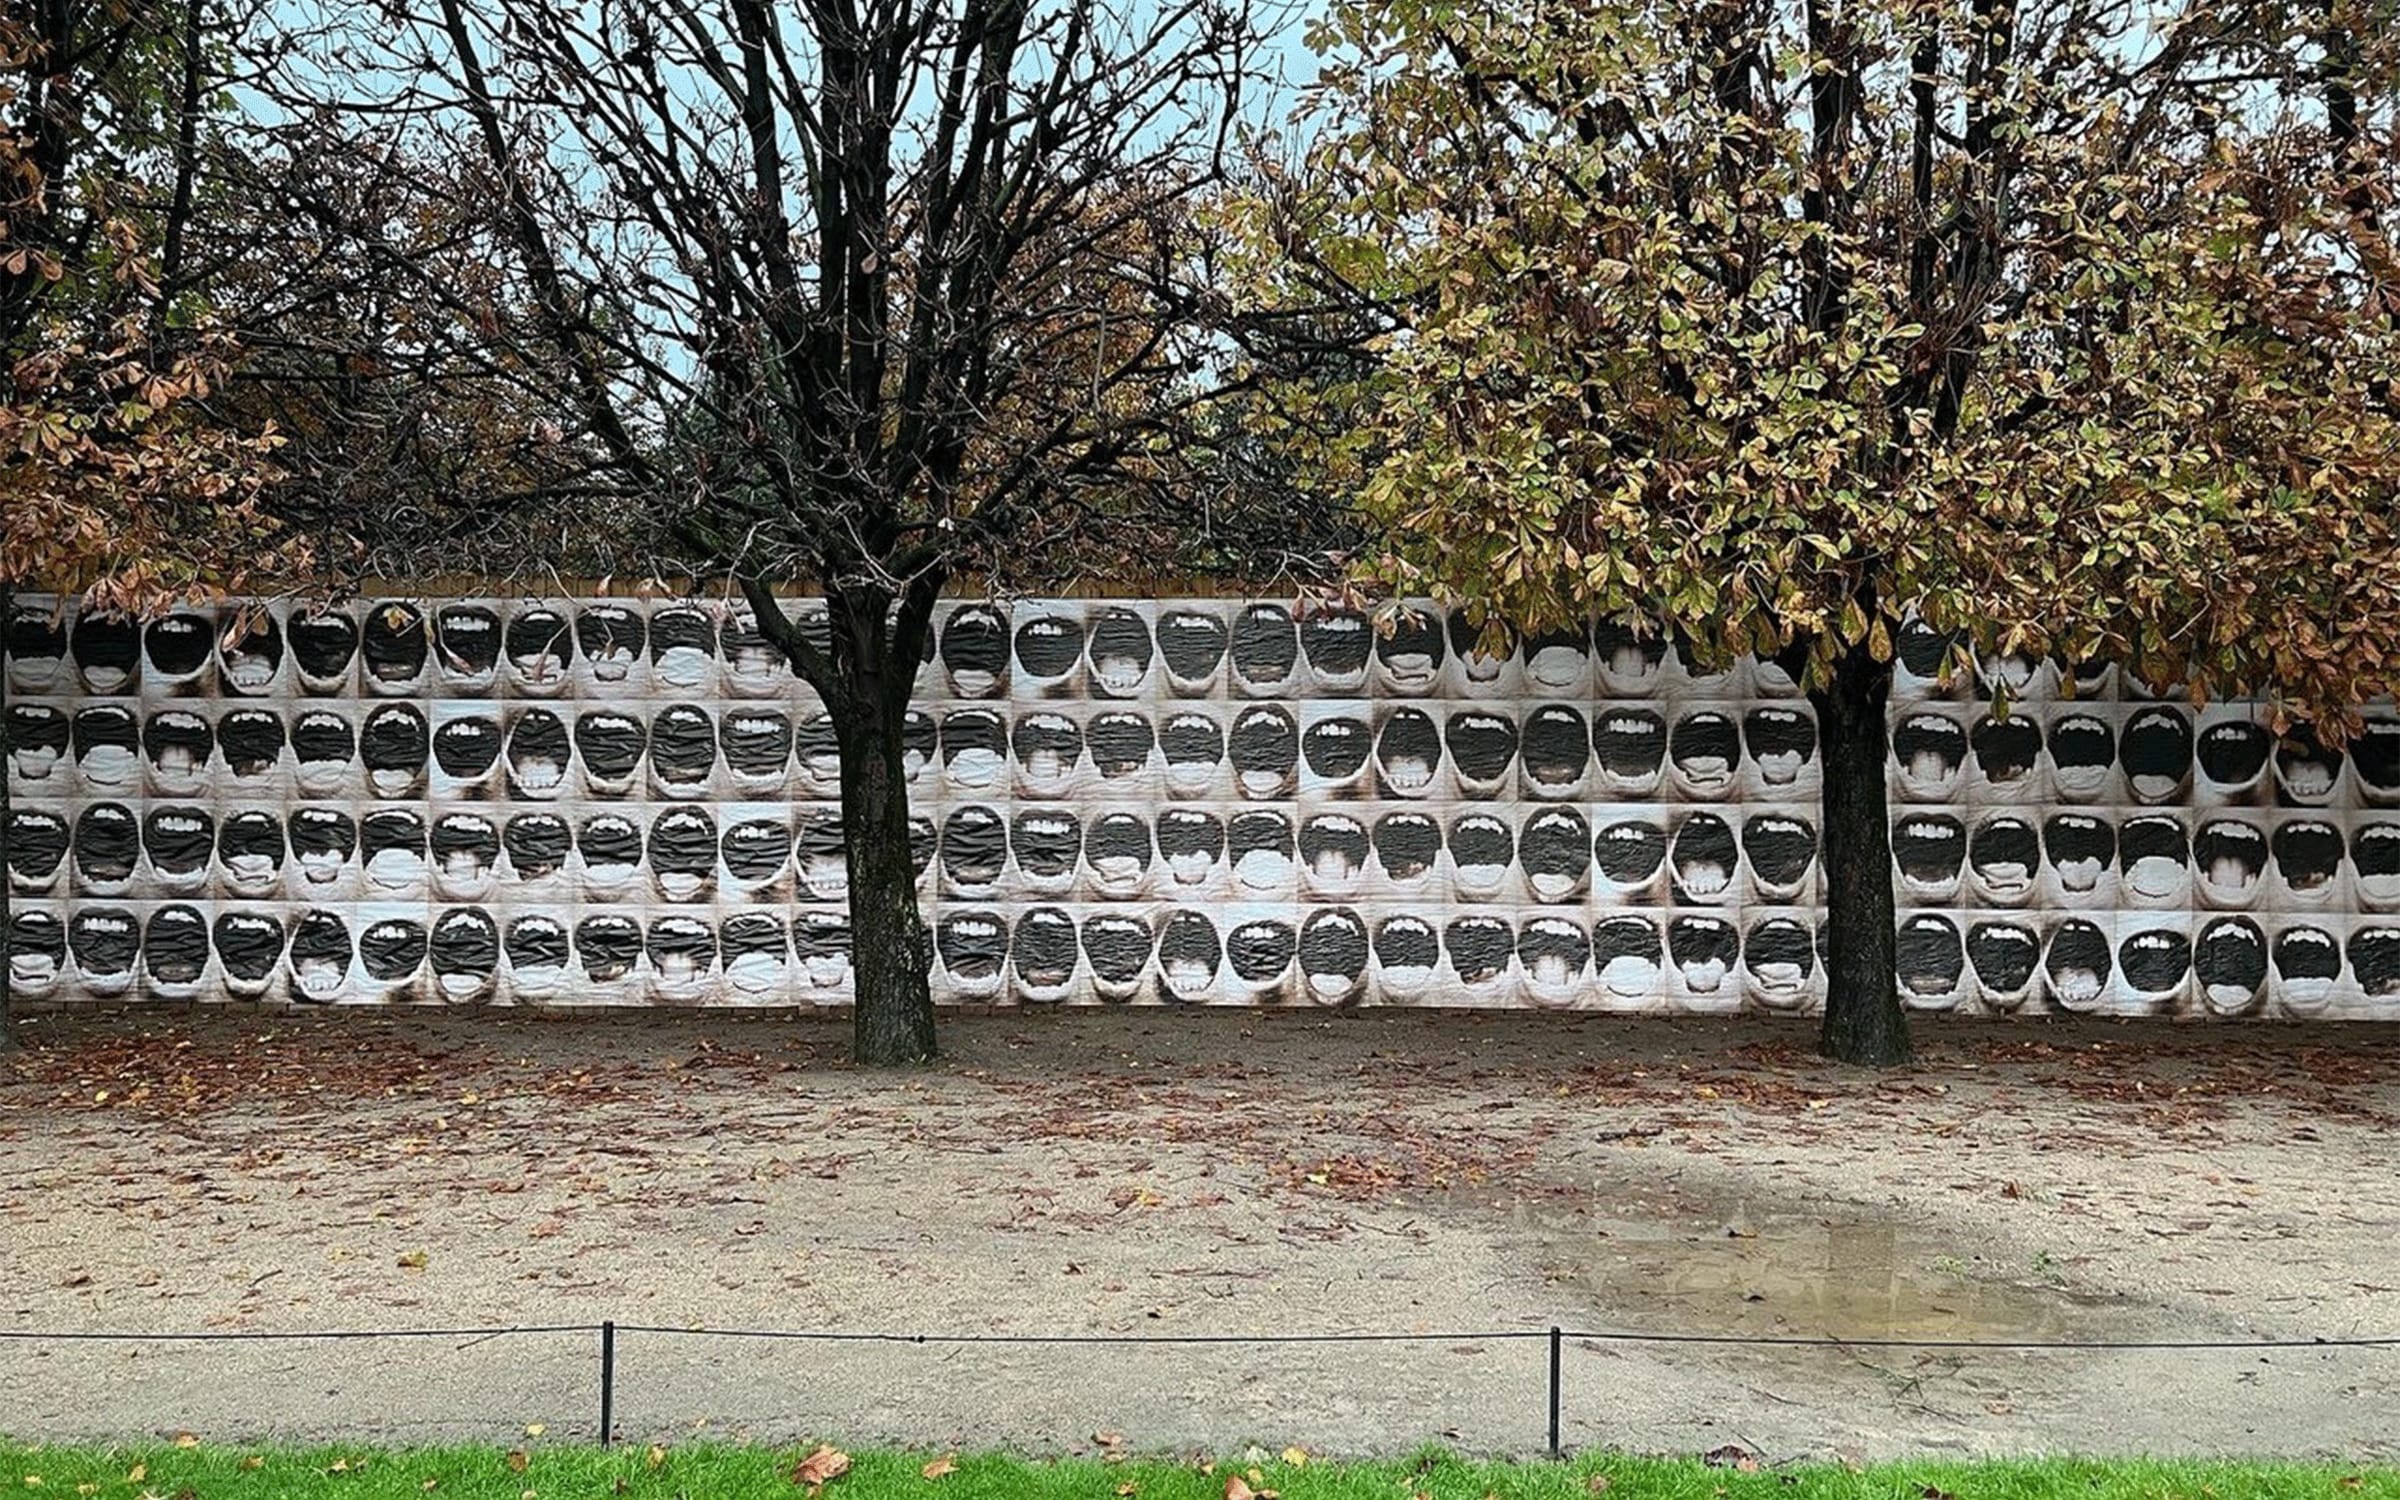 Installation view of Graciela Sacco’s Bocanada (1993) at the Jardin des Tuileries, Paris, 2022. Courtesy of Graciela Sacco Estate and Rolf Art gallery, Buenos Aires.